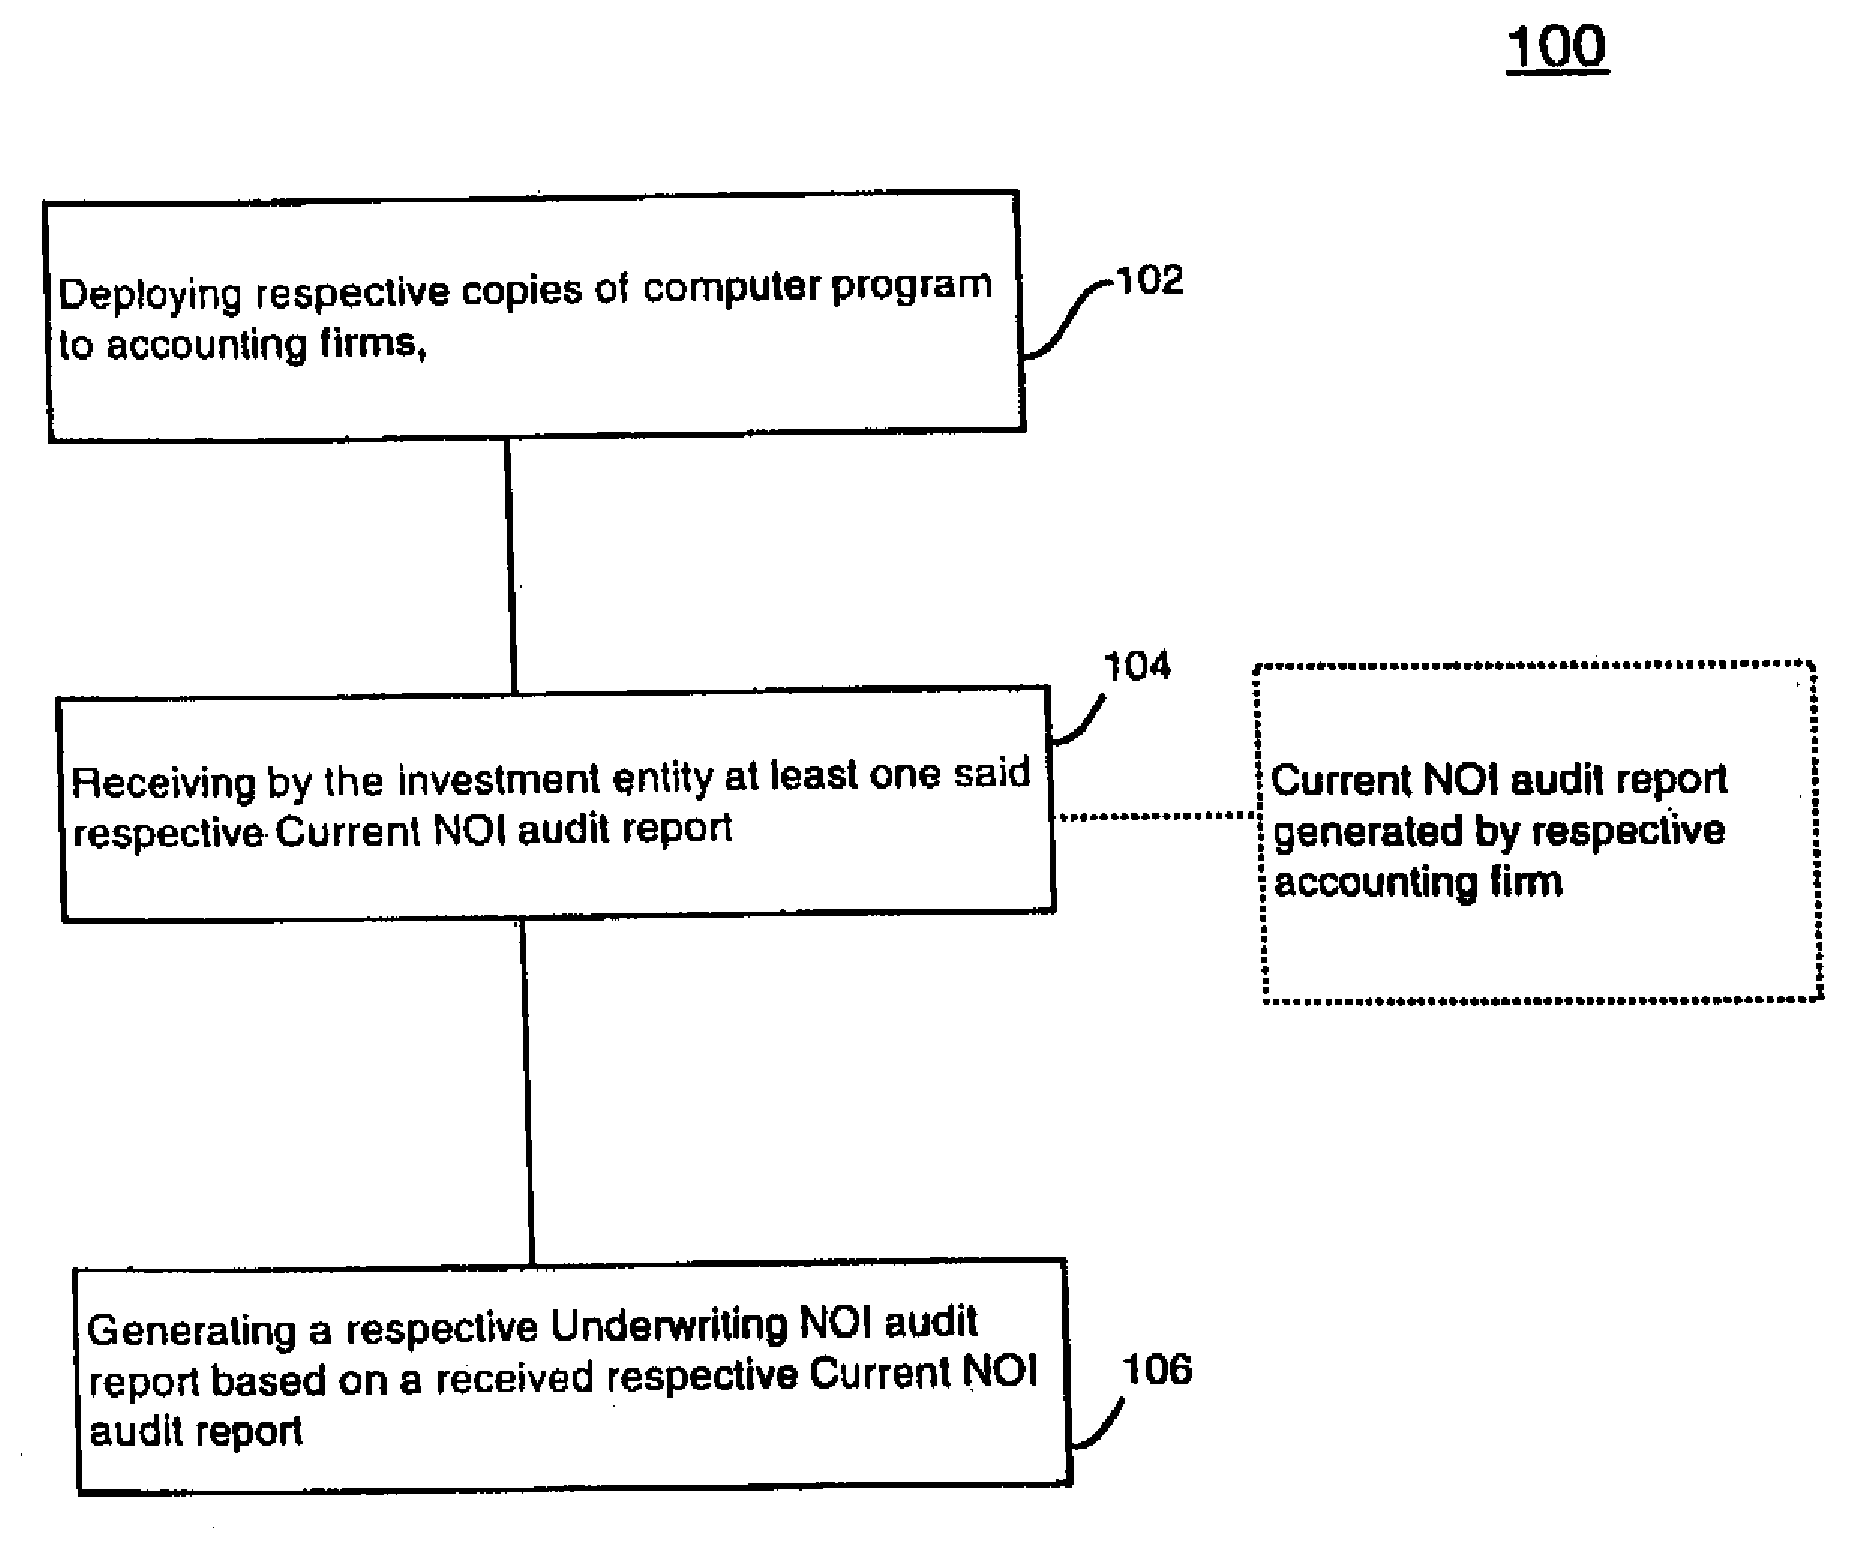 Method and product for calculating a net operating income audit and for enabling substantially identifical audit practices among a plurality of audit firms